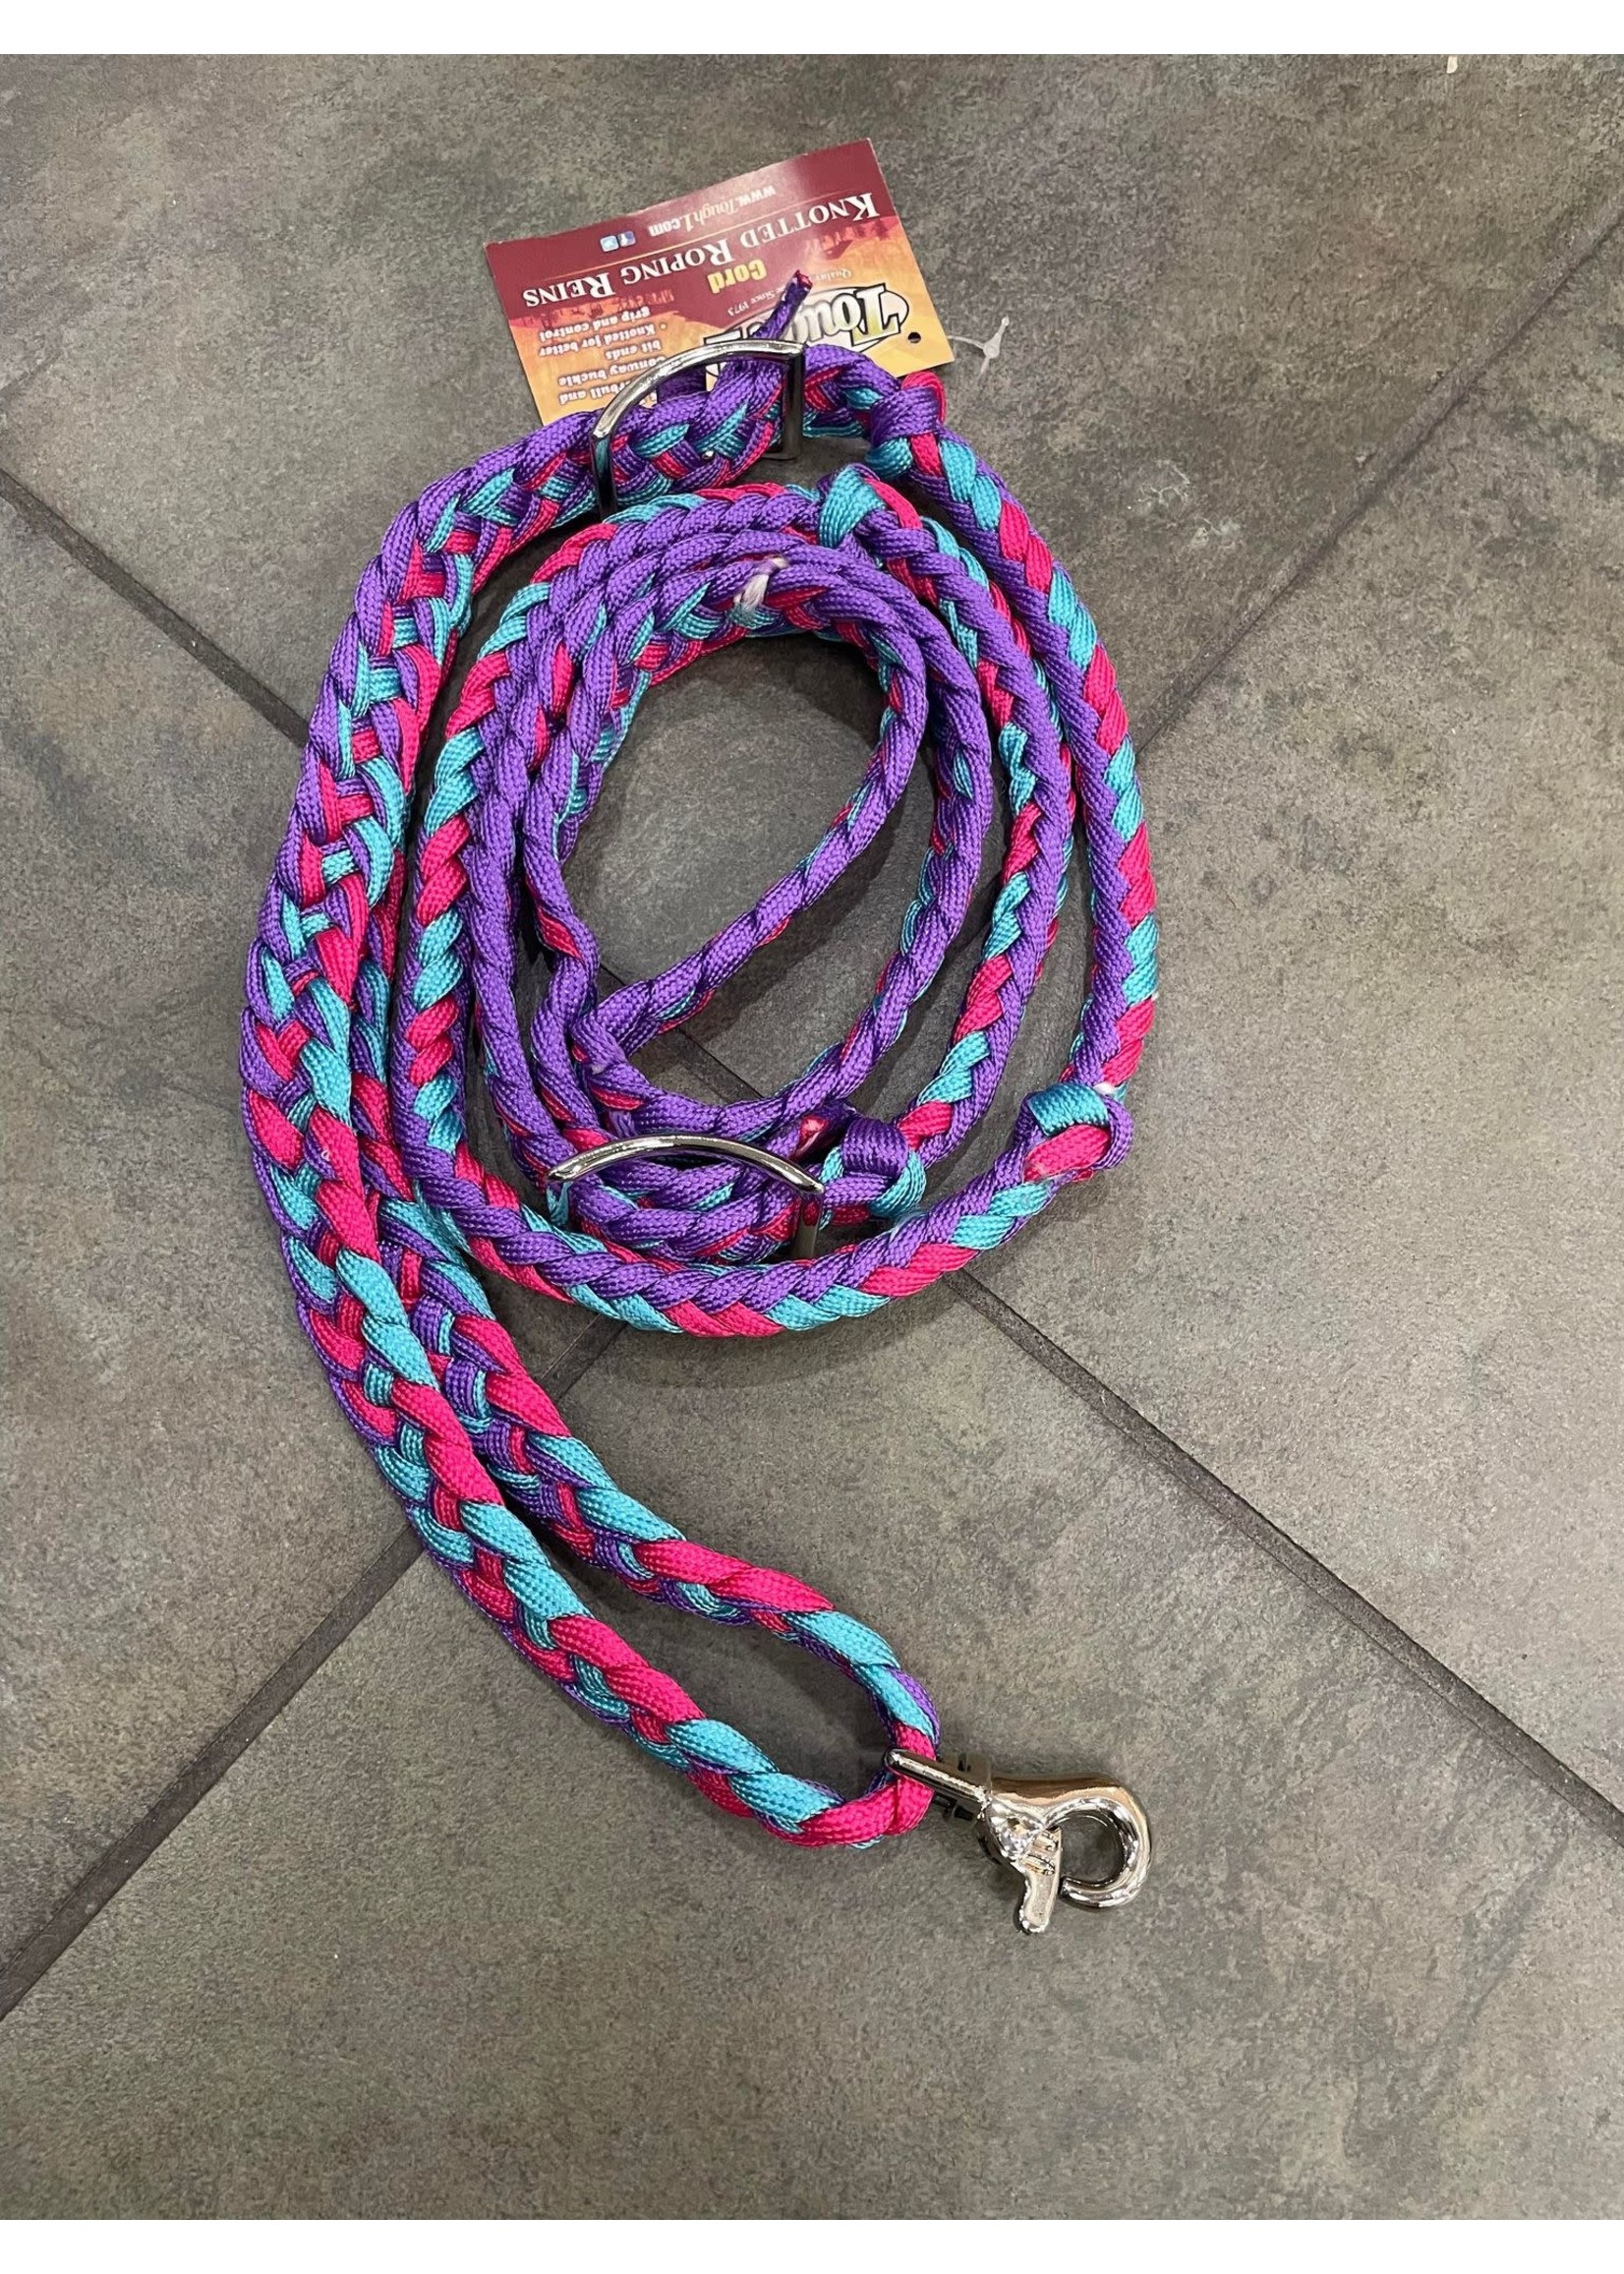 Knotted Barrel/Roping Reins w/ Snap